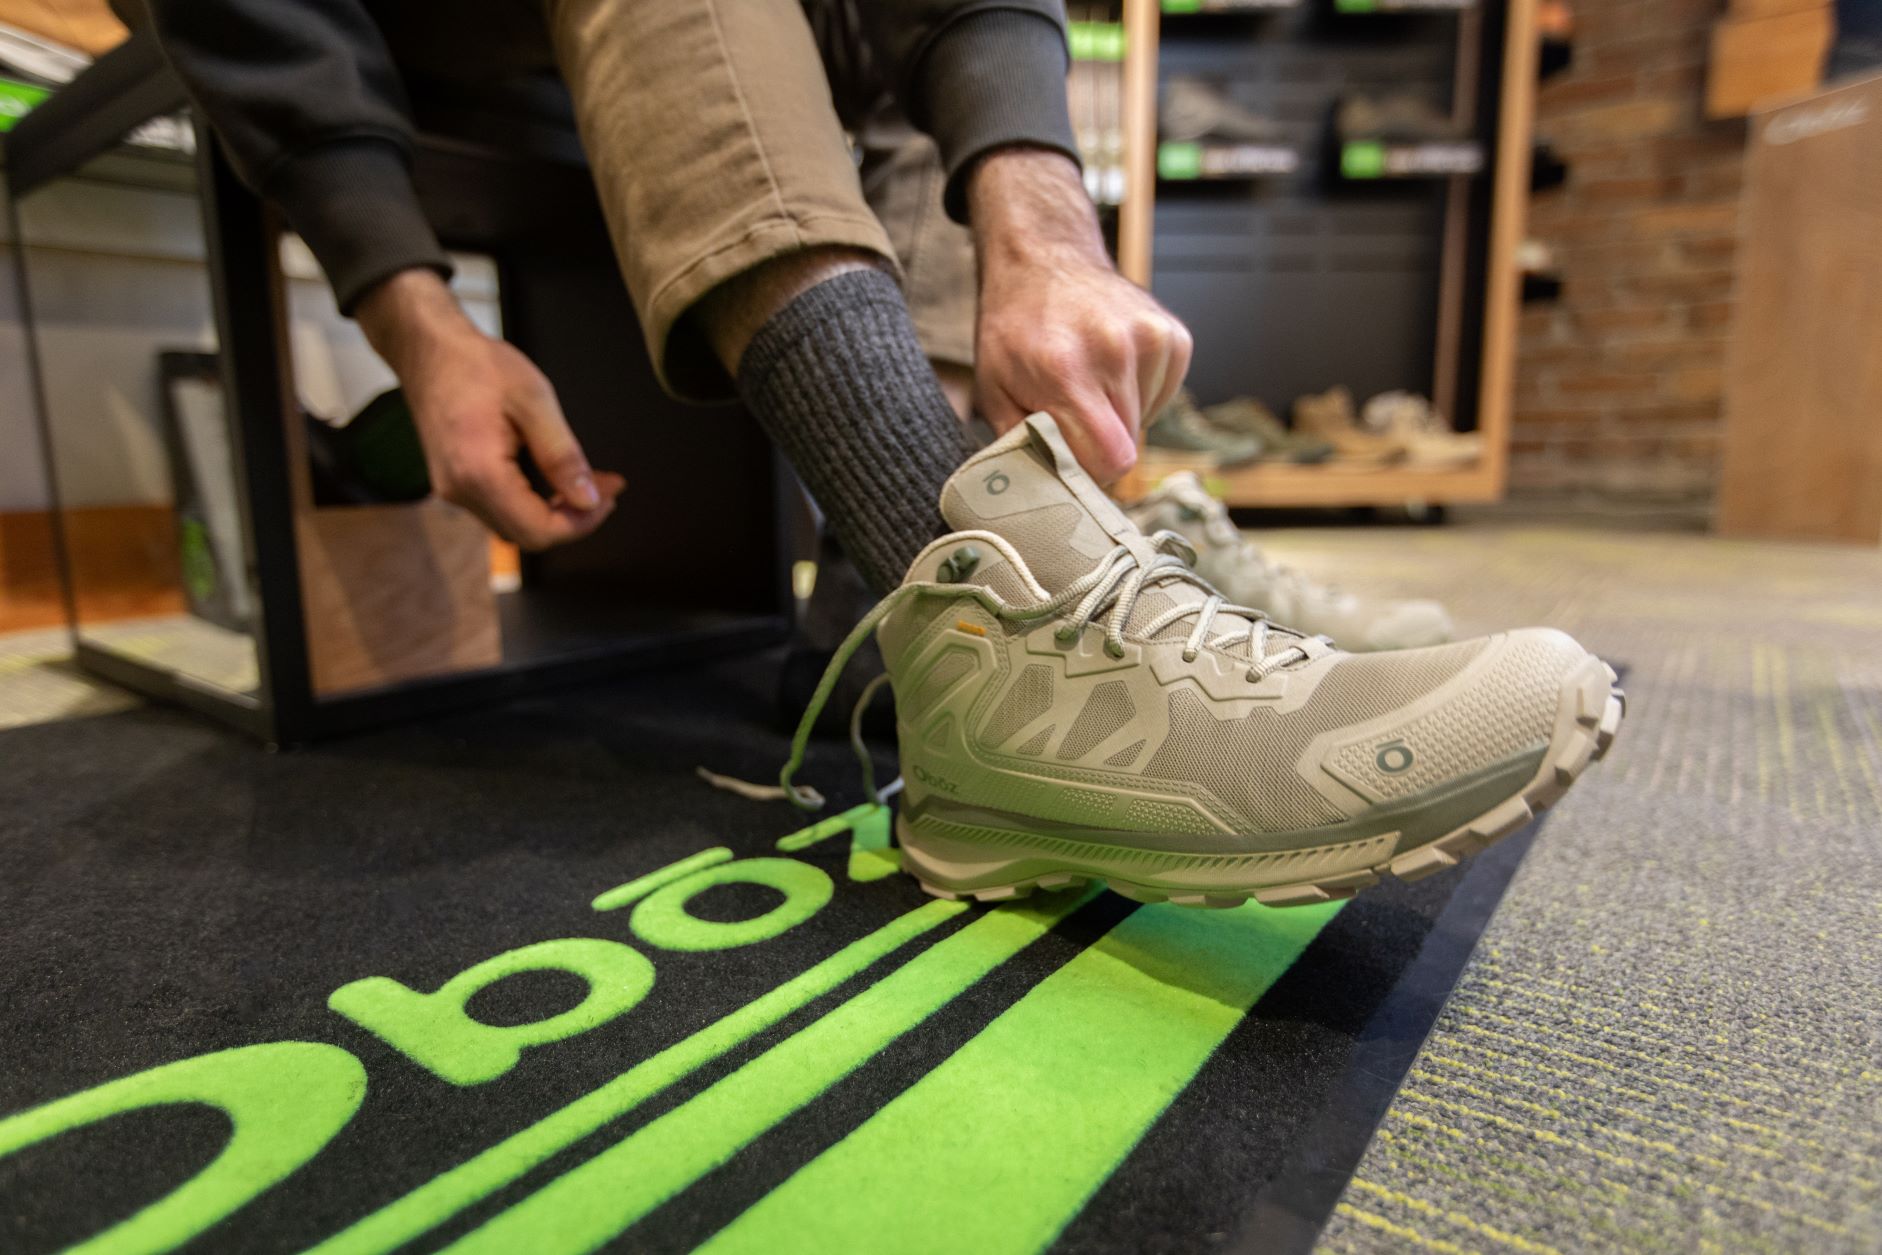 A person tries on an Oboz Katabatic Mid hiking shoe at a dealer. 